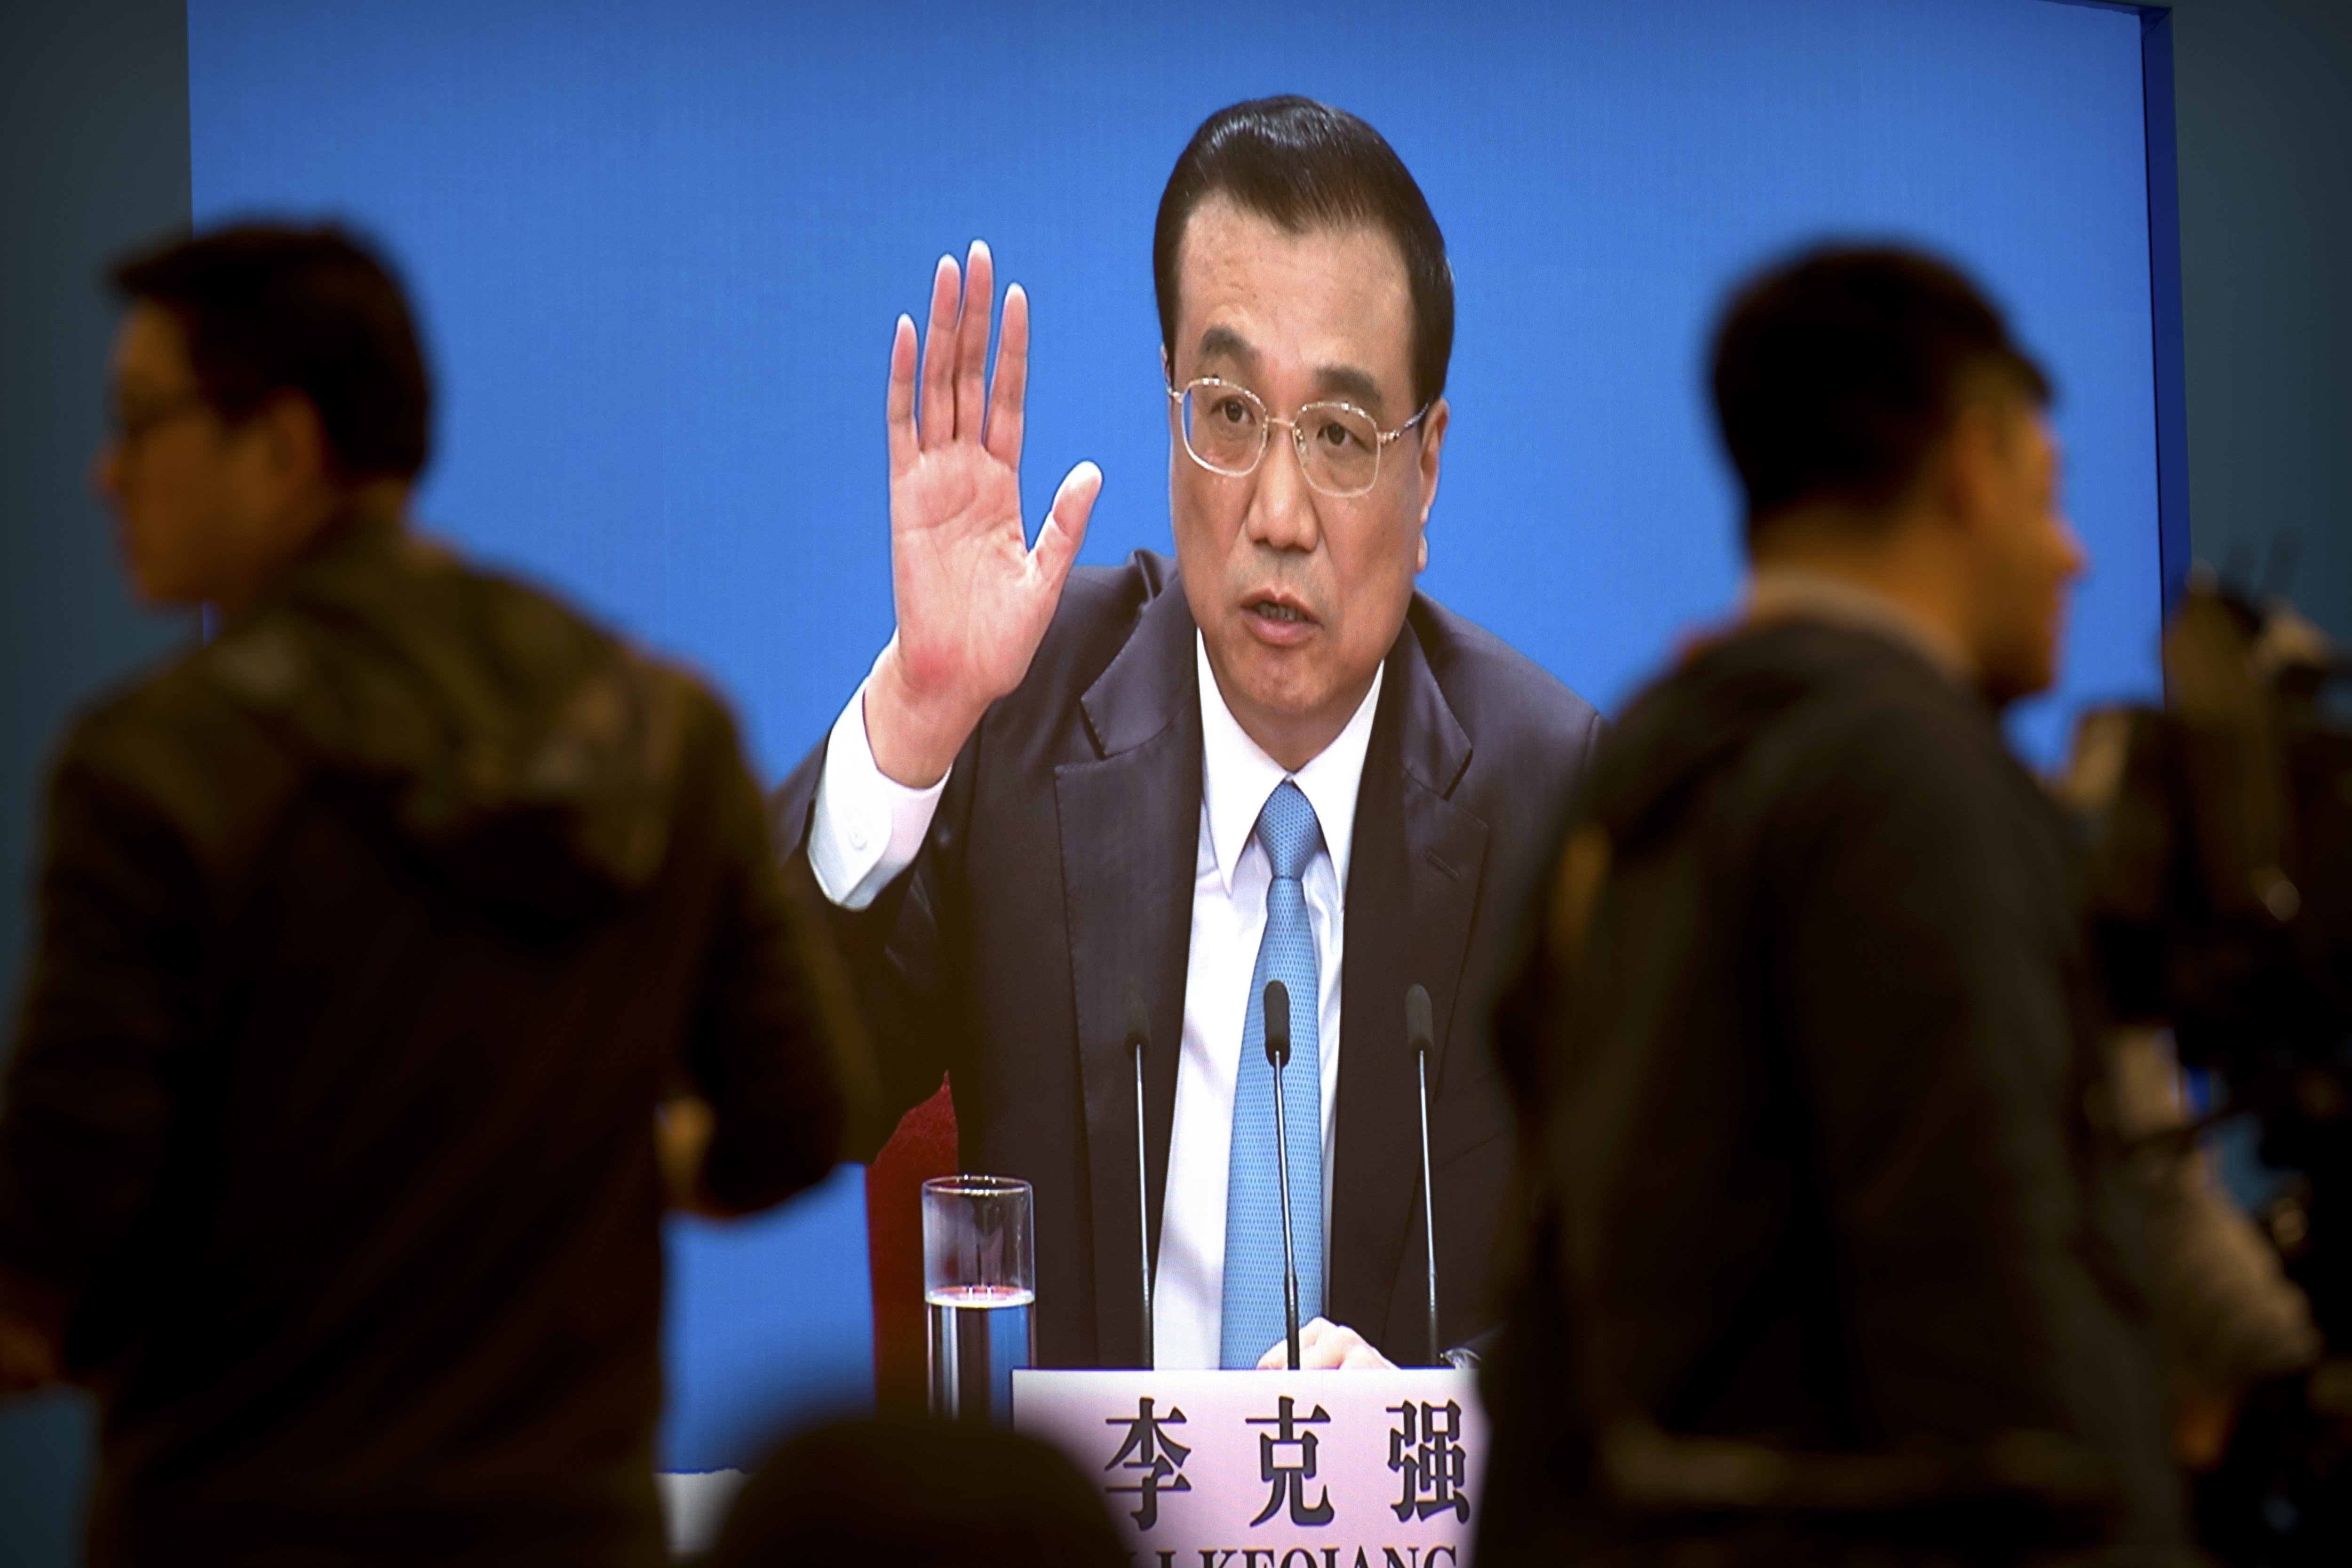 Premier Li Keqiang is shown on a large screen as he speaks during a press conference in Beijing on Tuesday. Photo: AP